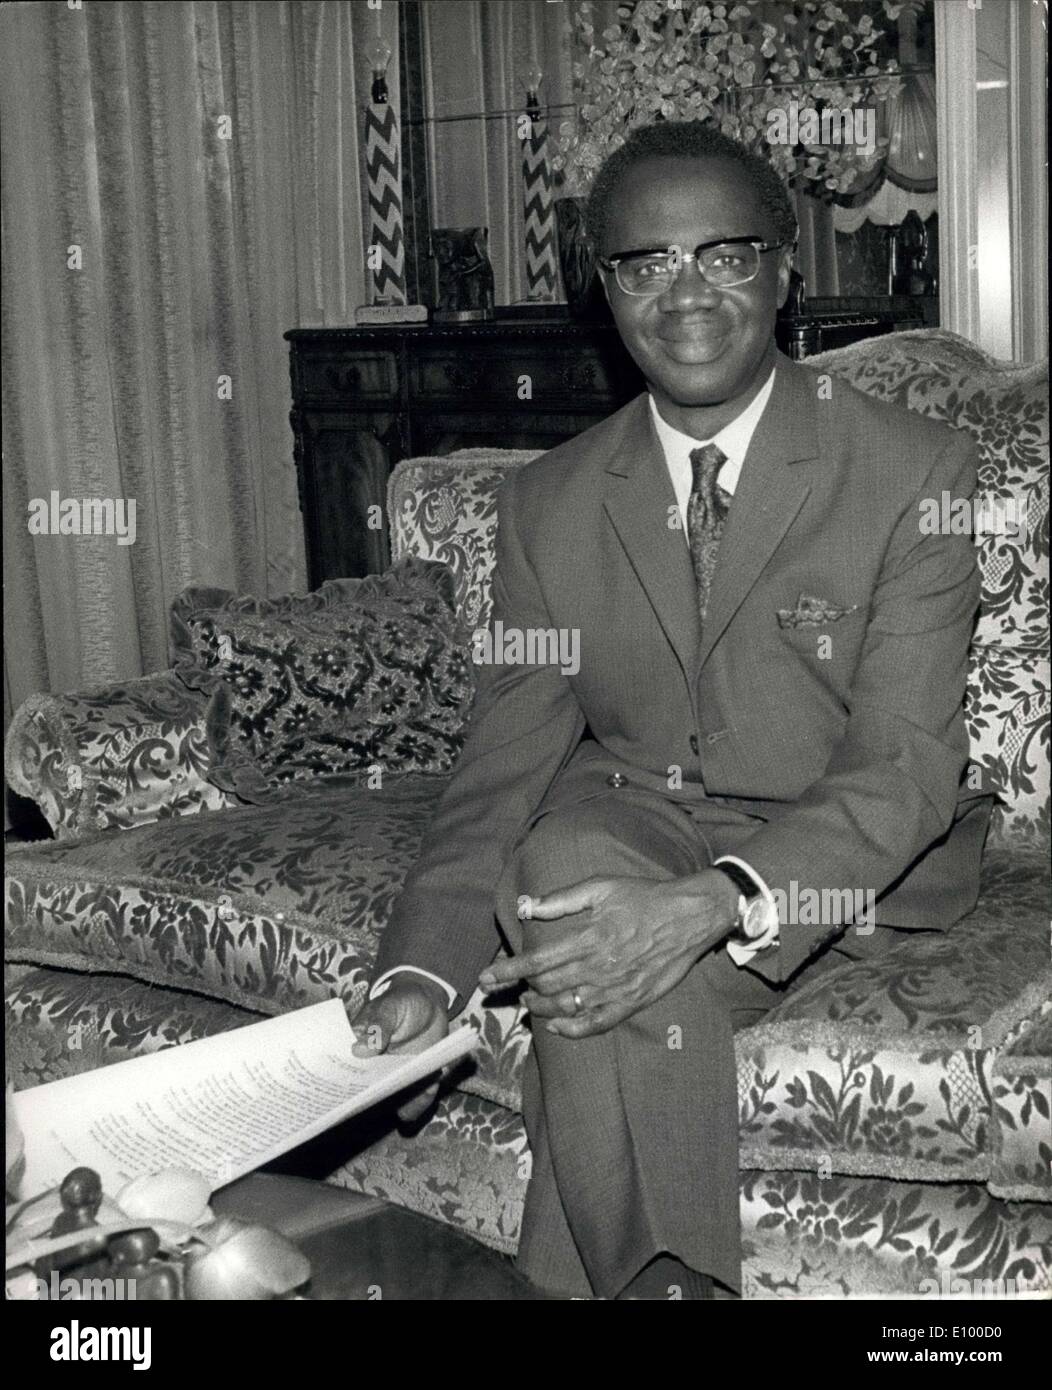 Jan. 14, 1972 - Army Coup In Ghana - Prime Minister Ousted. An Army-civilian group seized power in Ghana yesterday, dismissing from office Dr. Kofi Busia, 58, the country's Prime Minister. Dr. Busia was in London for medical treatment when the bloodless coup took place. Photo Shows:- The ousted Prime Minister - Dr. Kofi Busia at the Ghanaian High Commissioner's residence in St. John's Wood, London, last night. Stock Photo